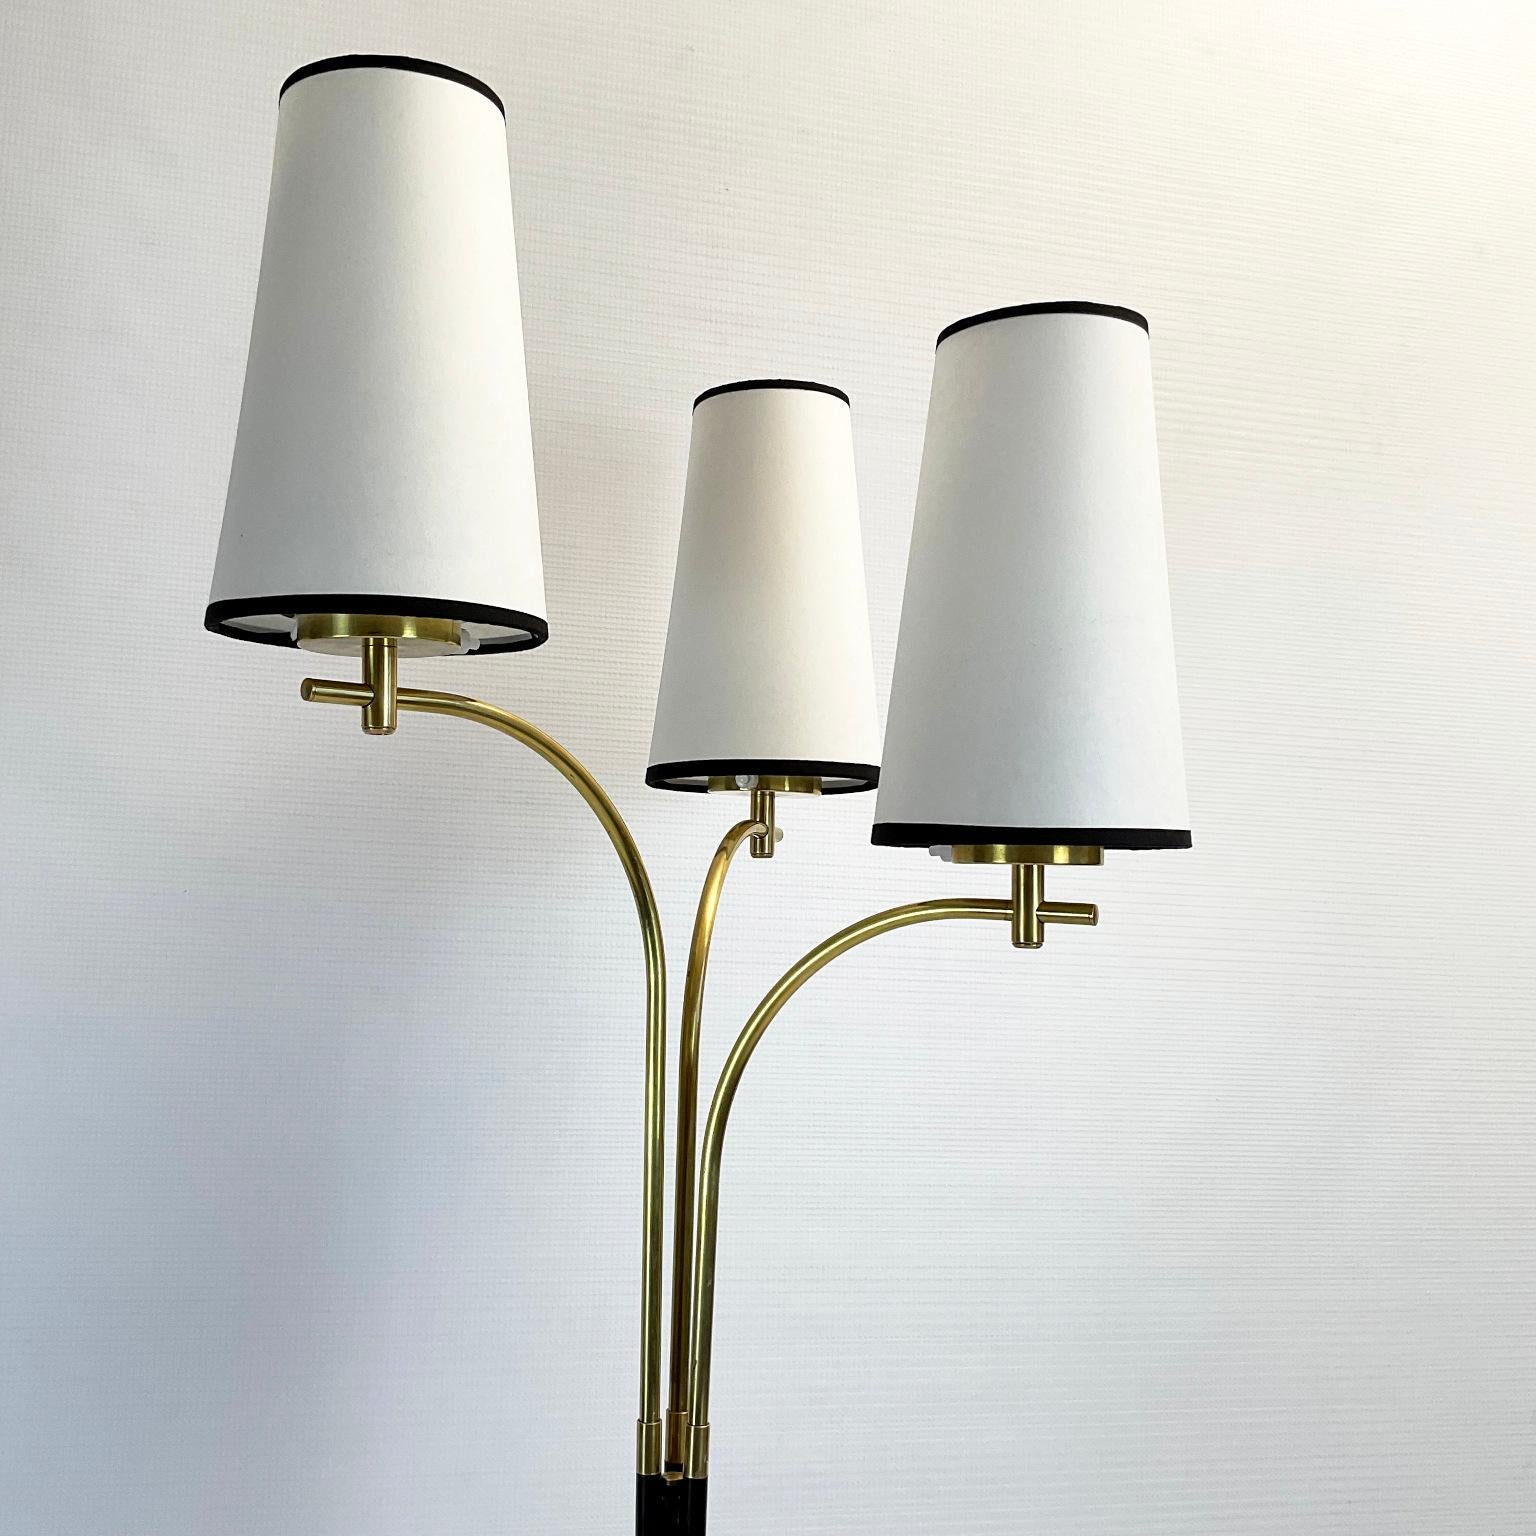 French 1950s Floor Lamp Attributed to Maison Lunel France